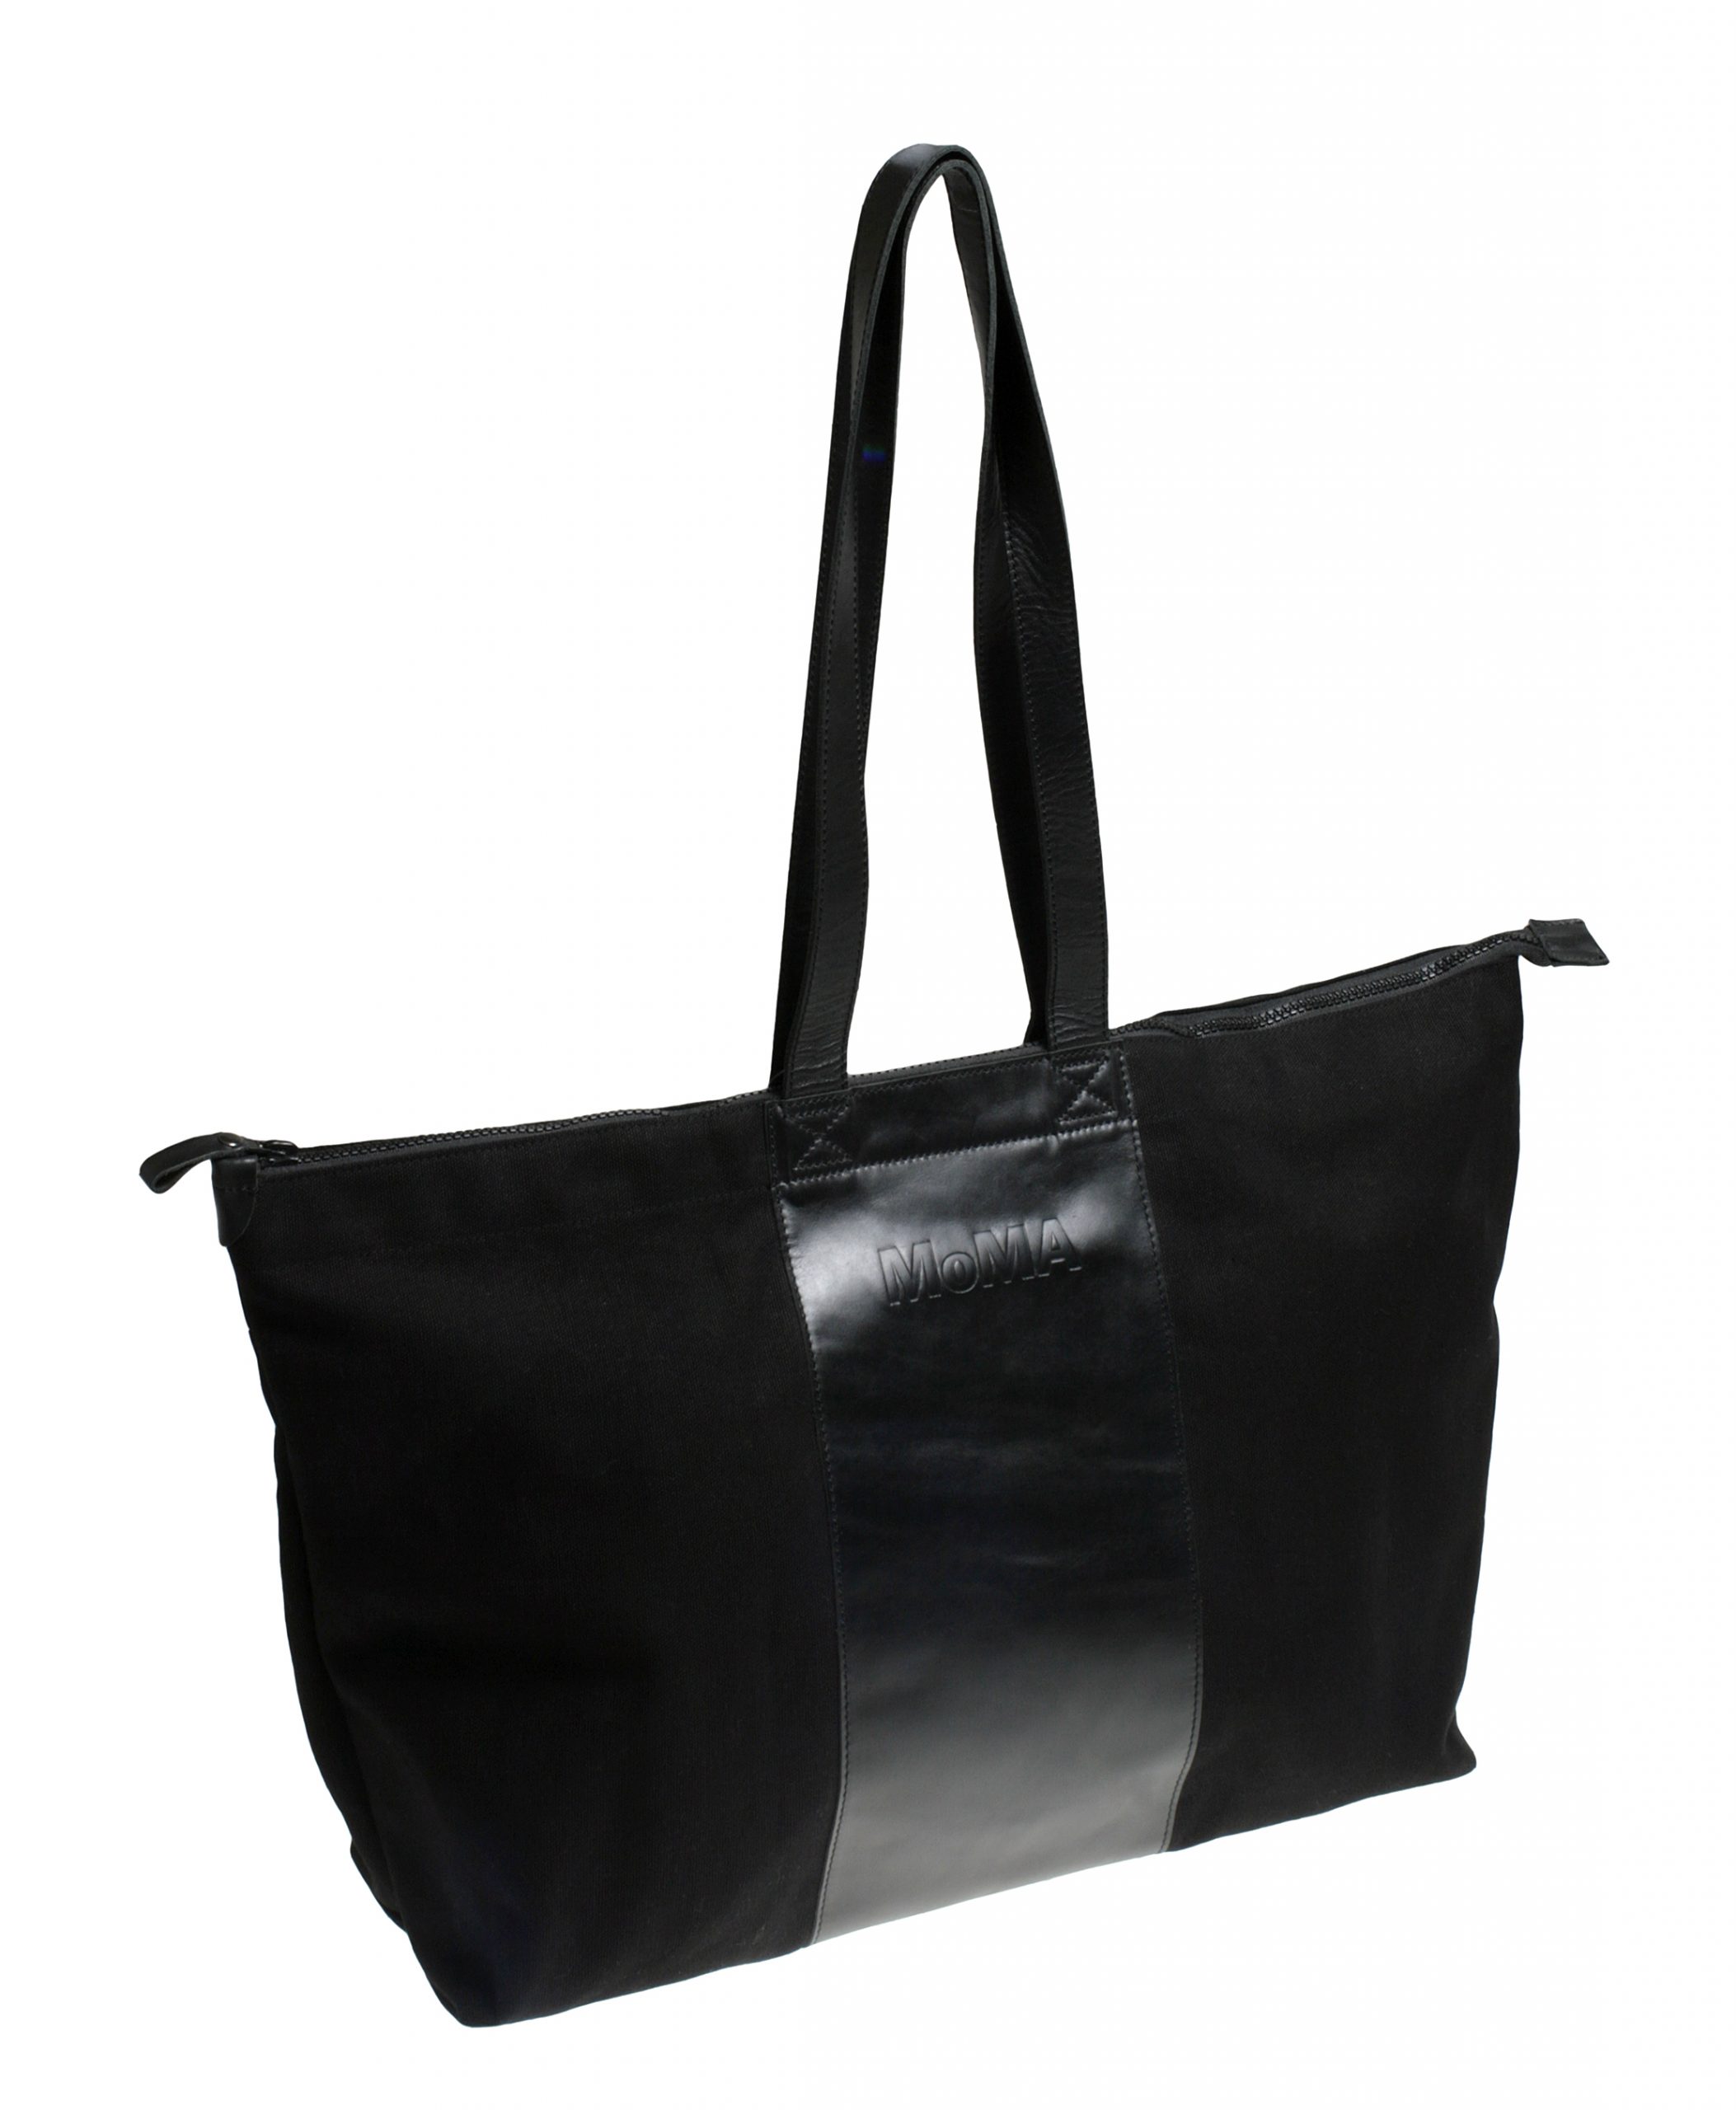 Leather and canvas totes